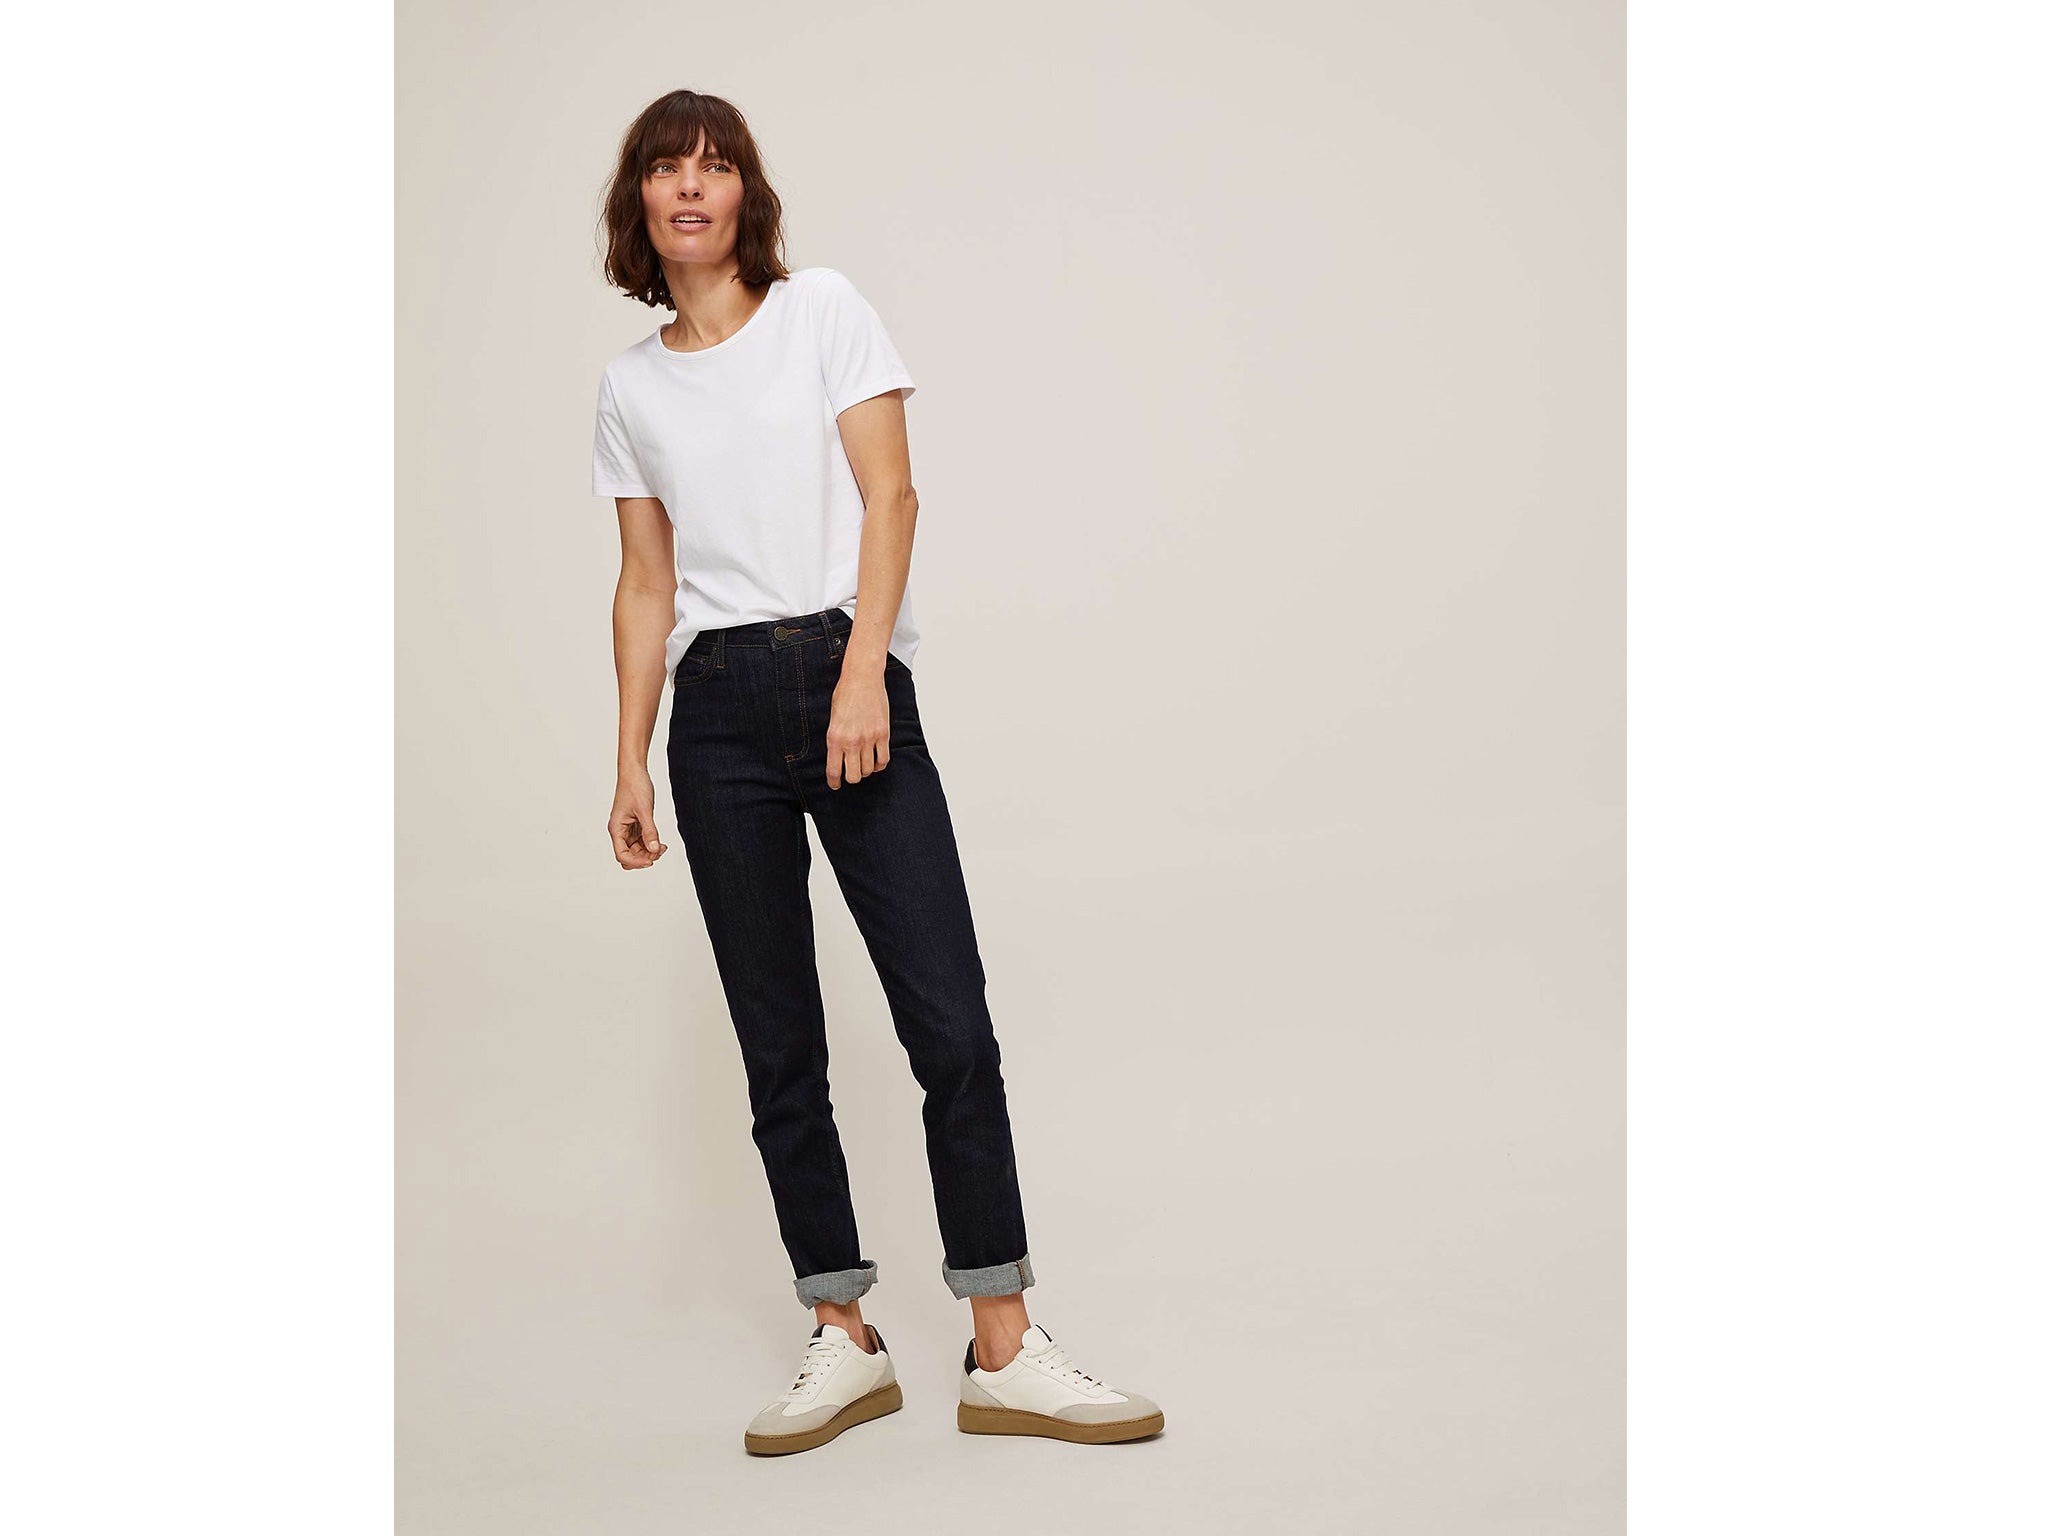 The ultimate basic T-shirt is this £7 John Lewis tee